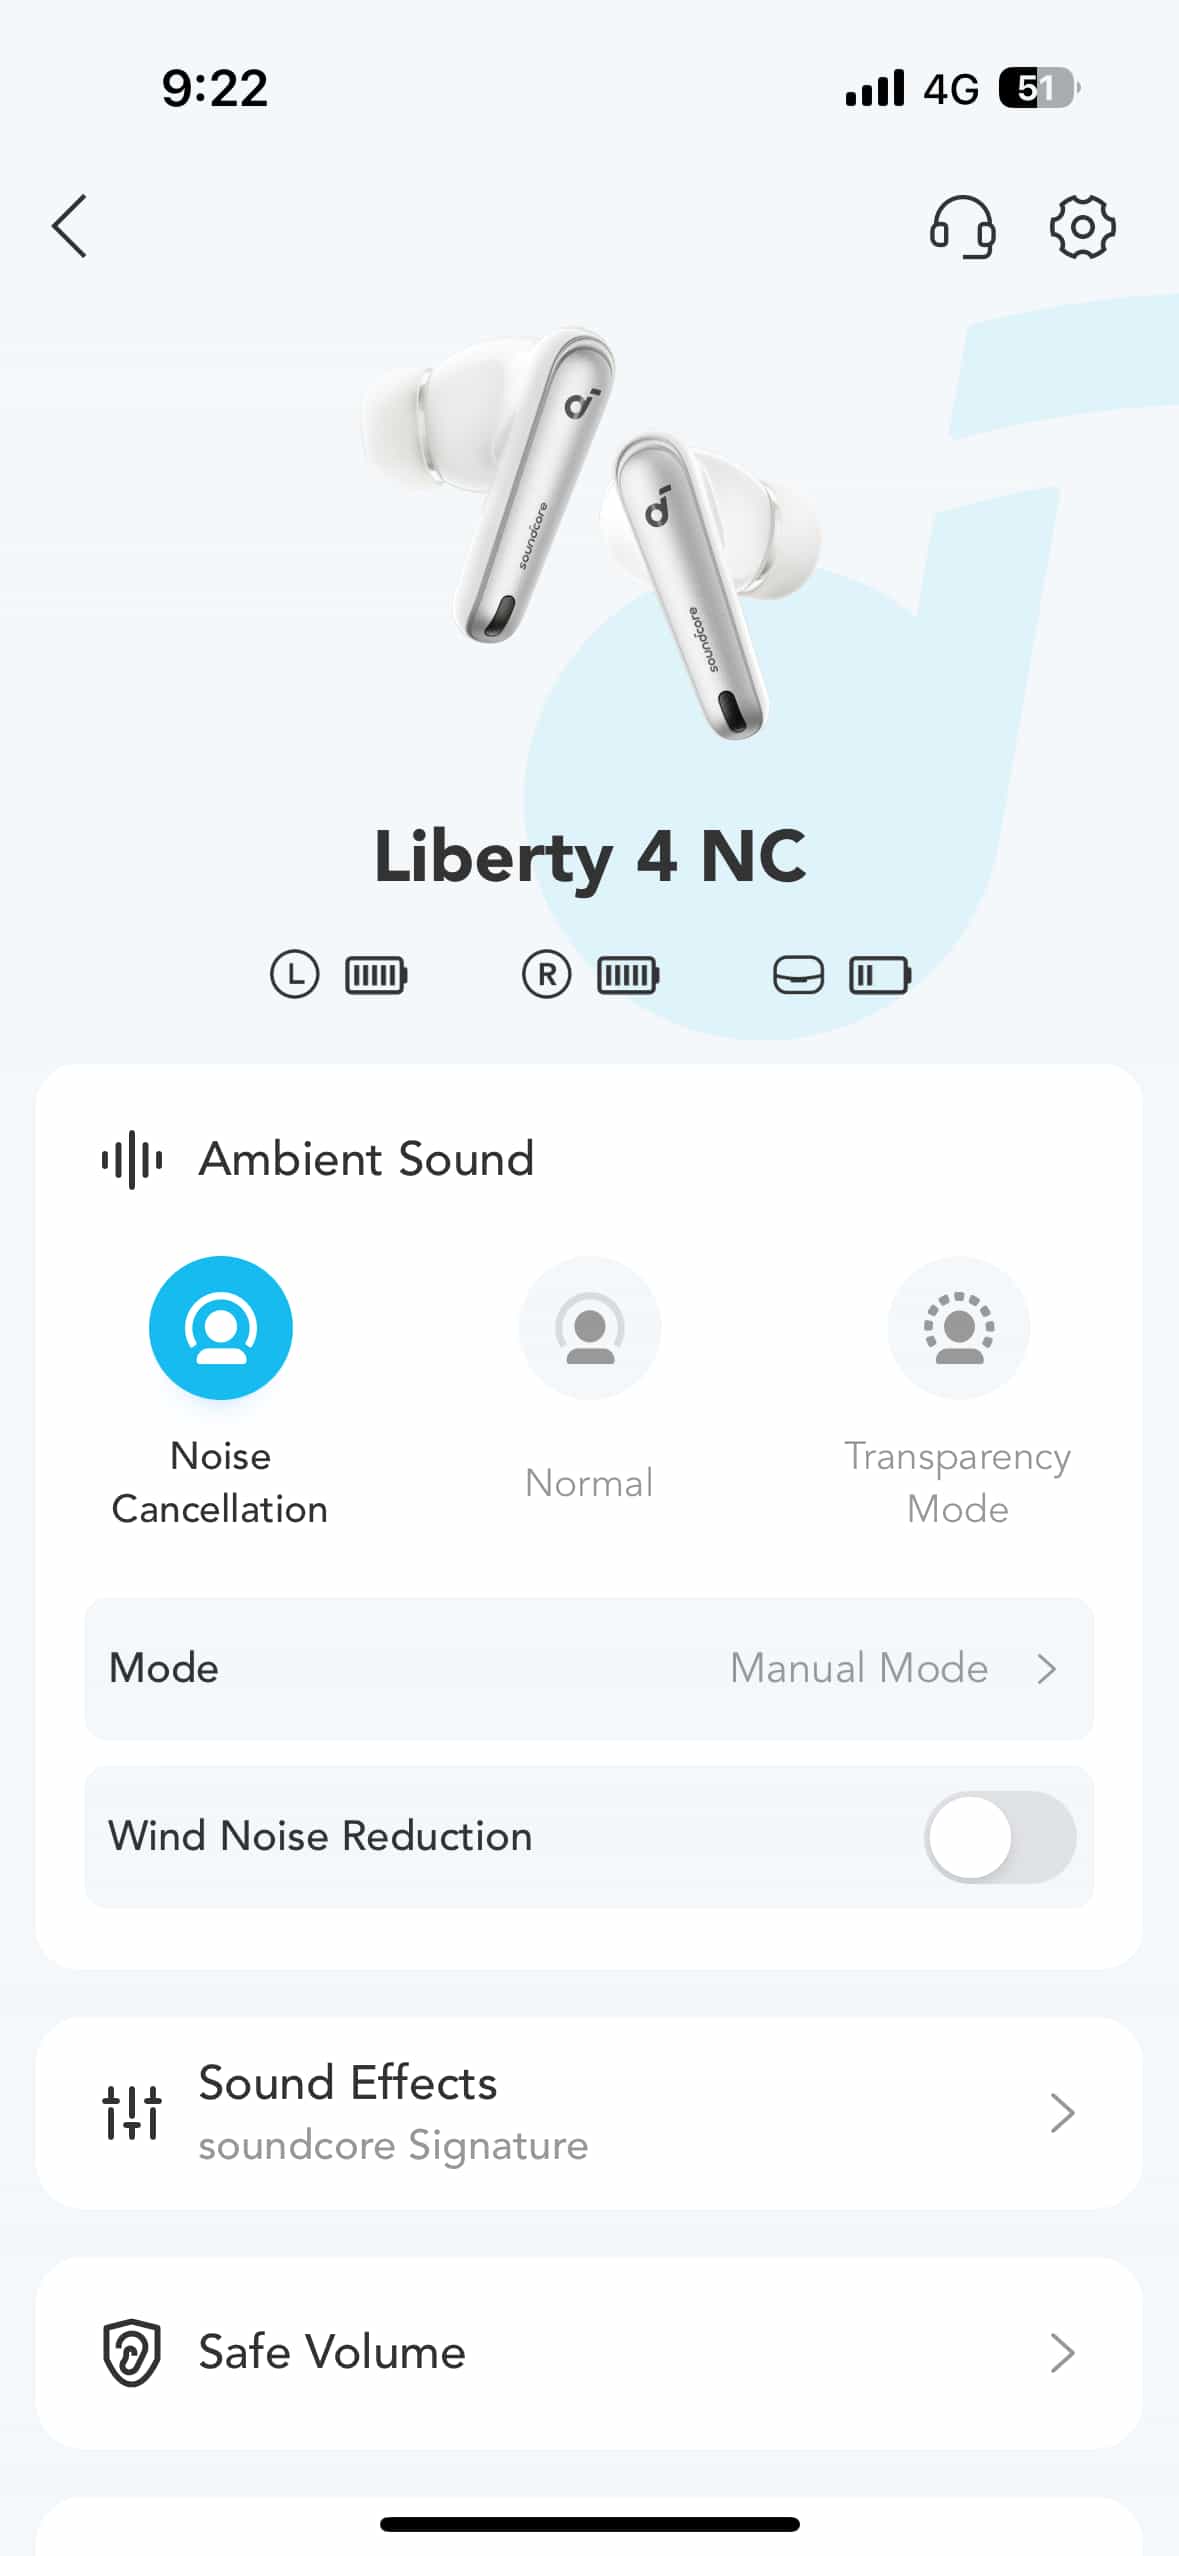 iOS screenshot of the Anker Soundcore app displaying Liberty 4 NC wireless earbuds settings with options for Ambient Sound, Noise Cancellation, Transparency Mode, Manual Mode selection, Wind Noise Reduction toggle, Sound Effects customization, and Safe Volume feature